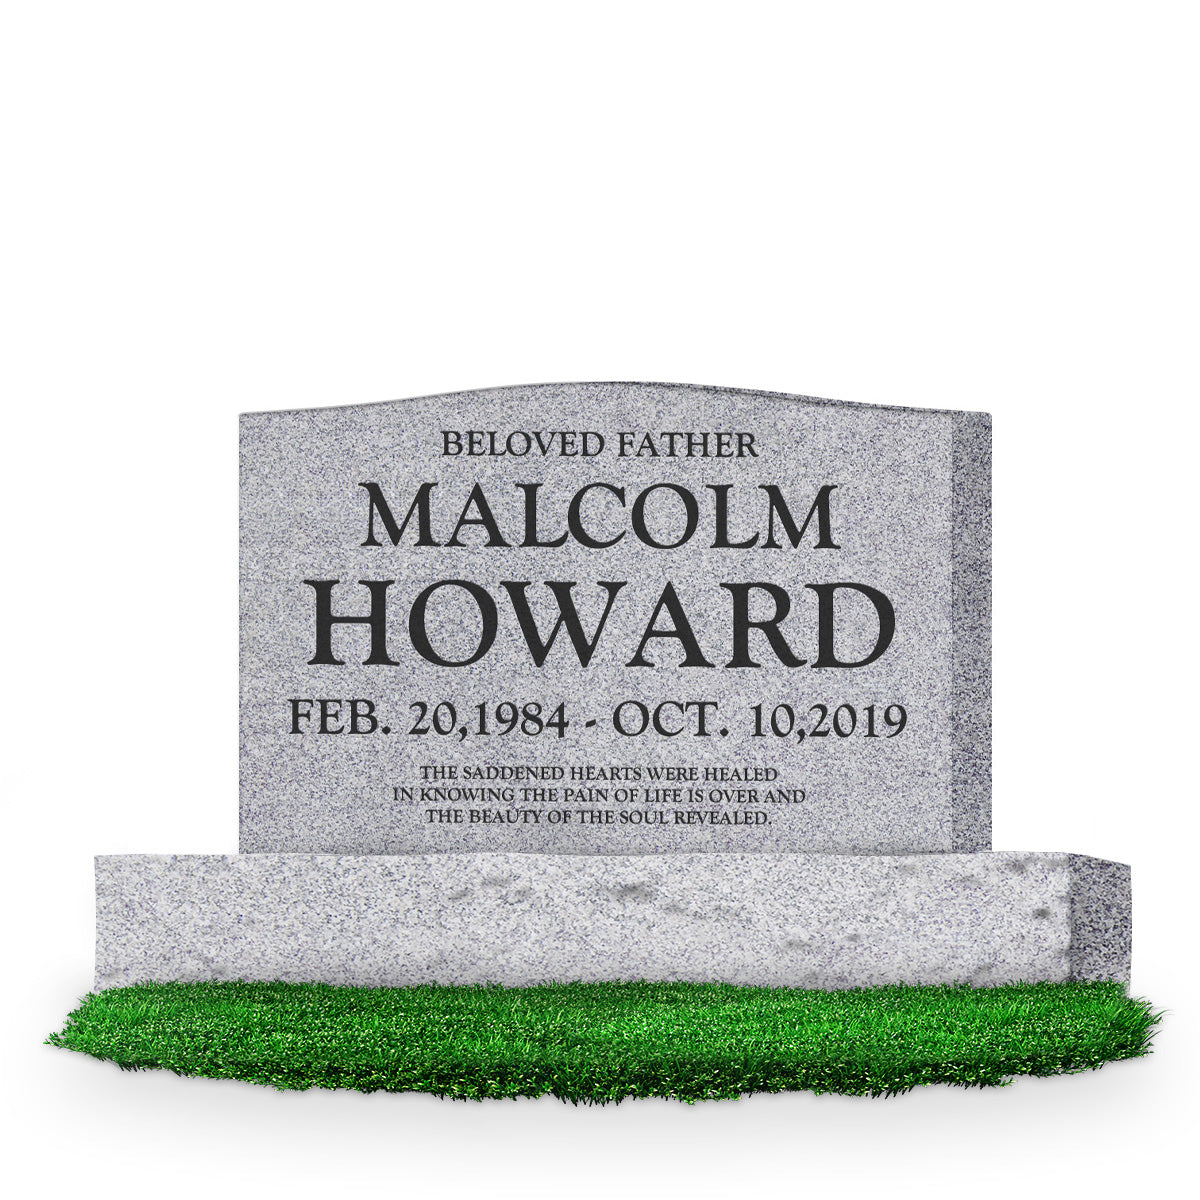 36″ x 6″ x 24″ Serp Top Upright Headstone: polished top, front and back; 48″ base; Single/Text